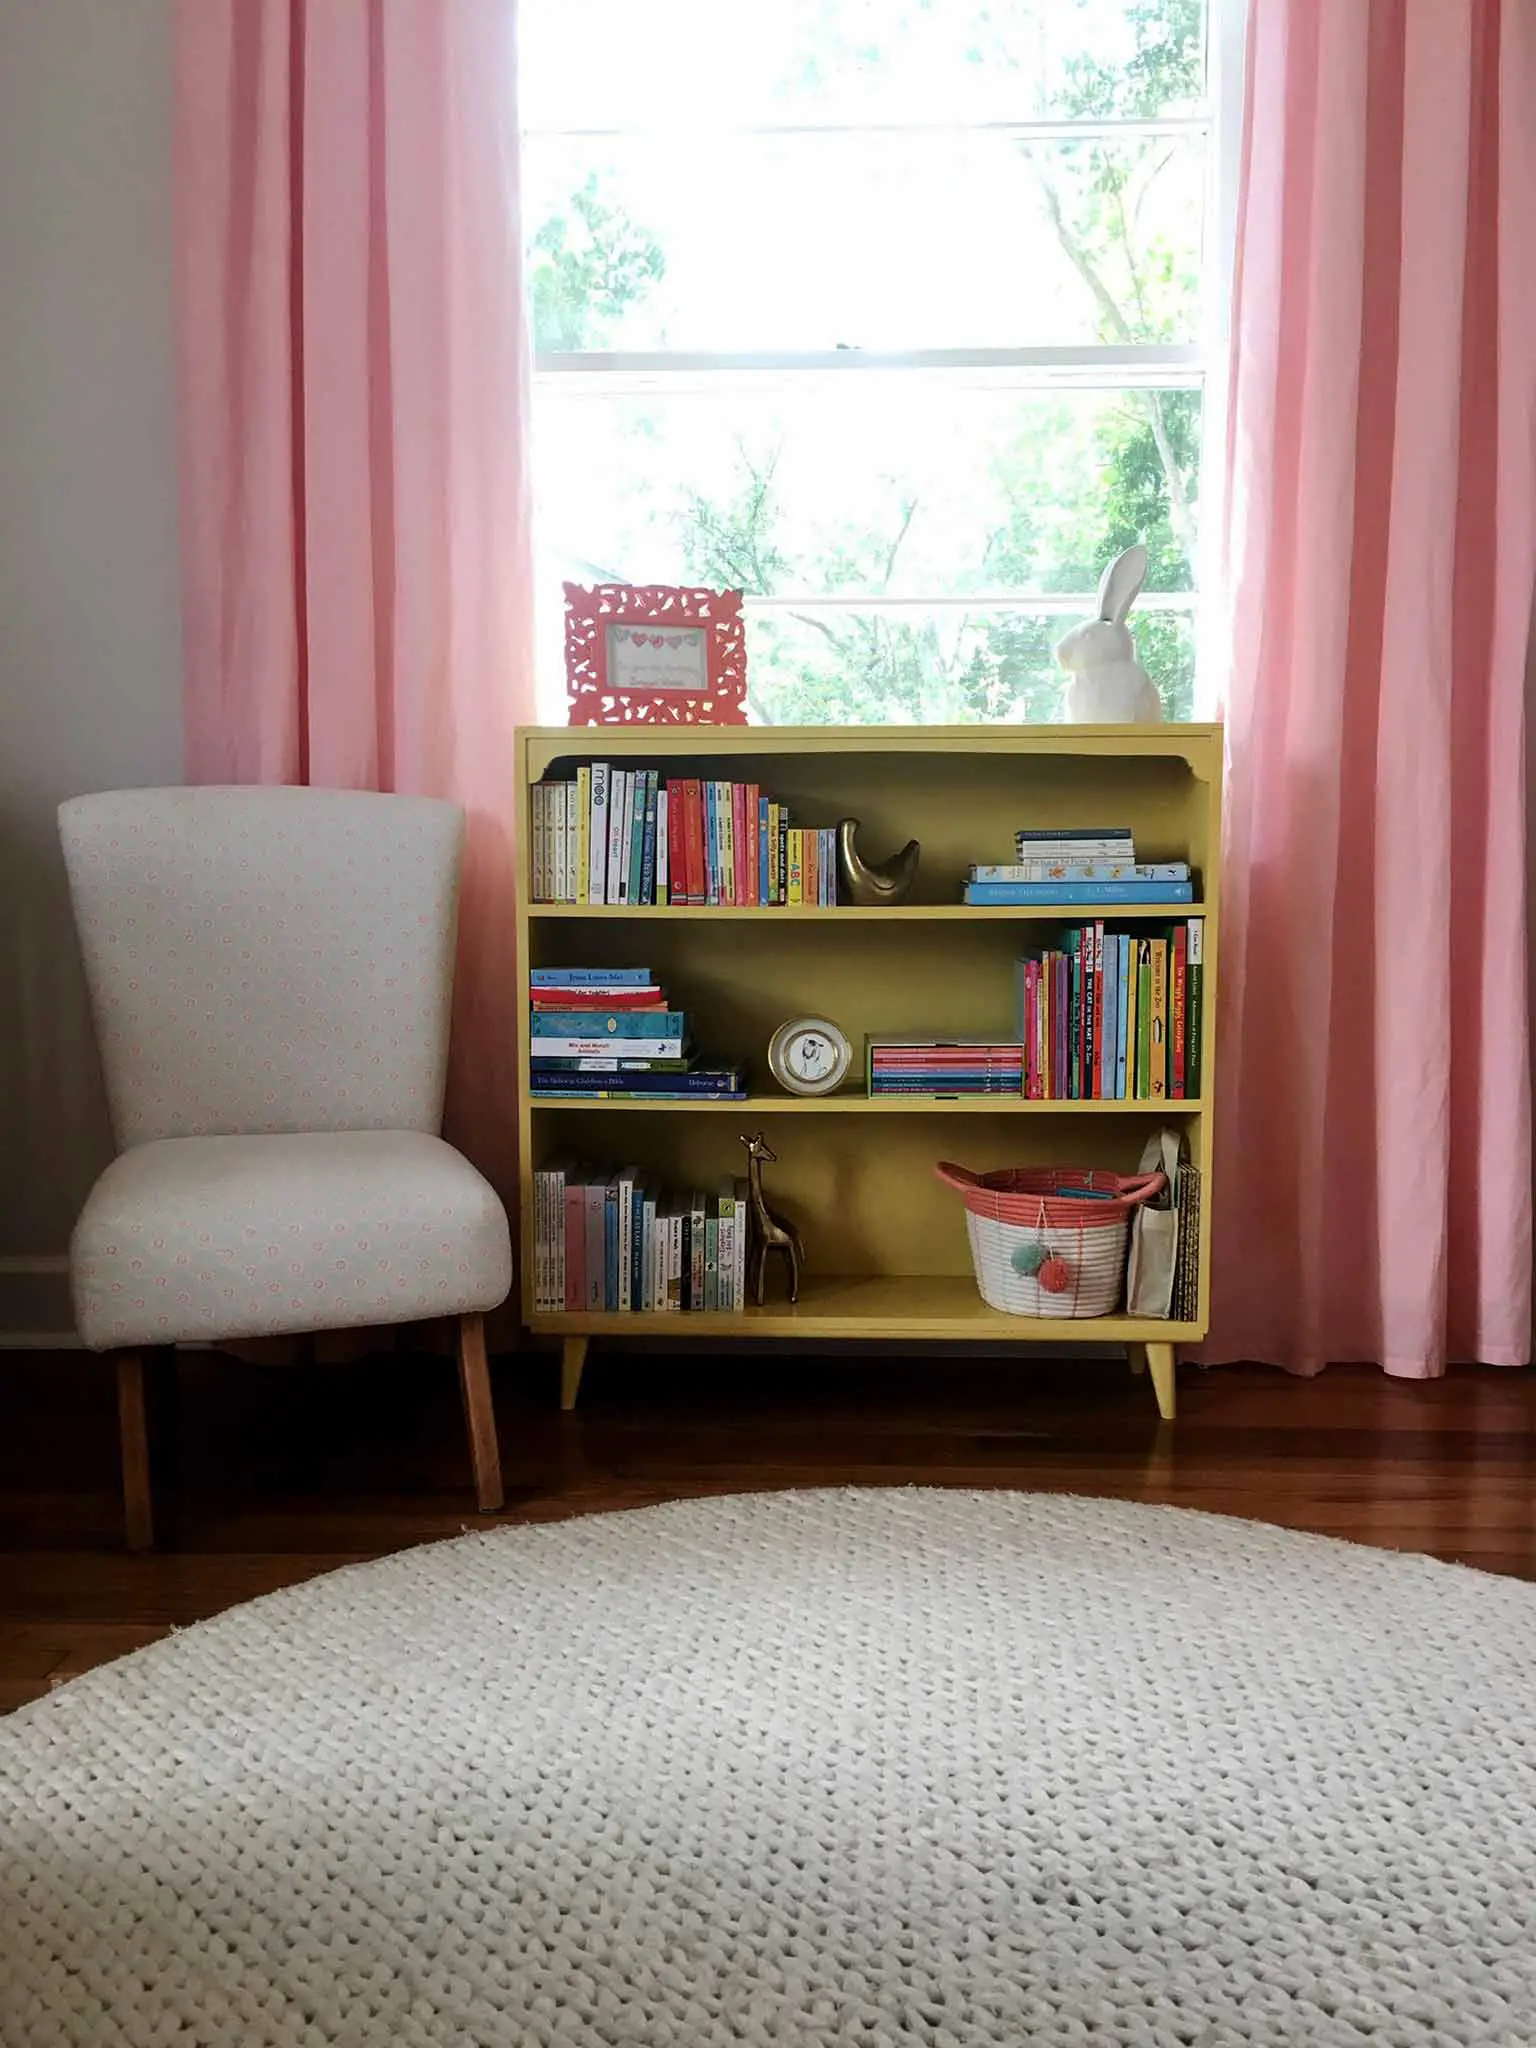 Vintage bookshelf - How to Declutter, Organize and Style Kids' Books - That Homebird Life Blog